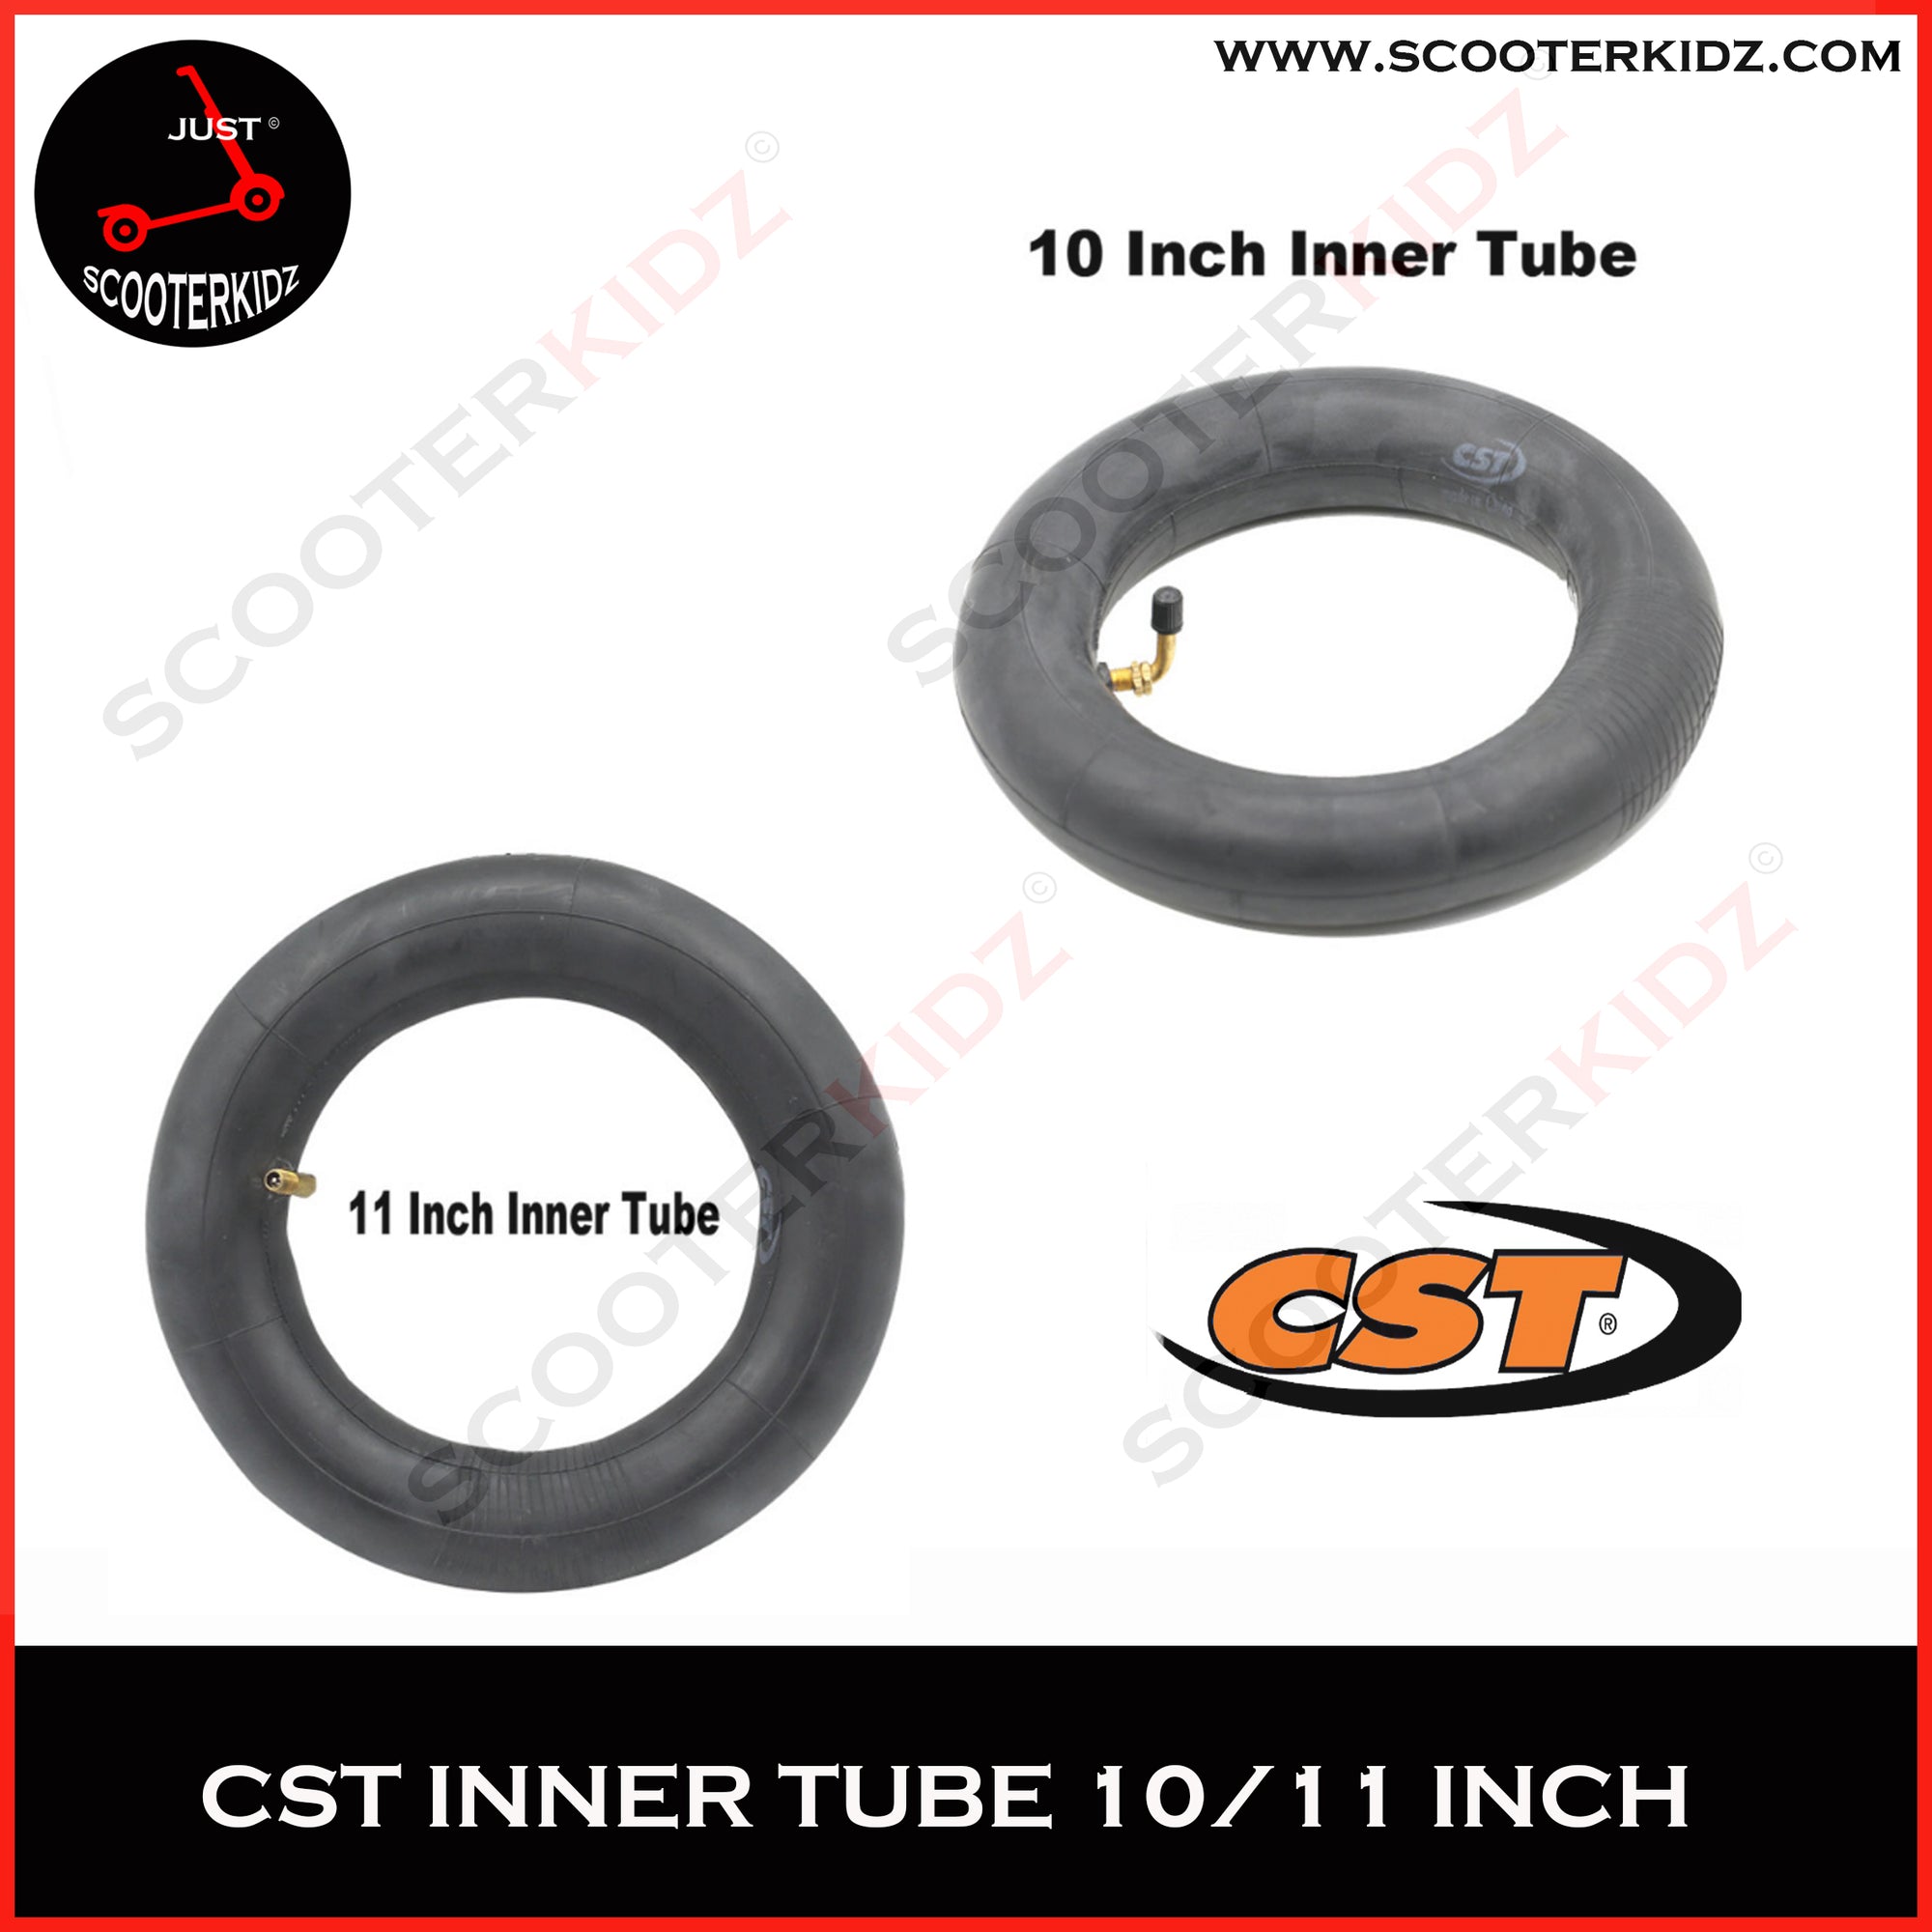 CST Tube for 10 inch and 11 inch Escooter